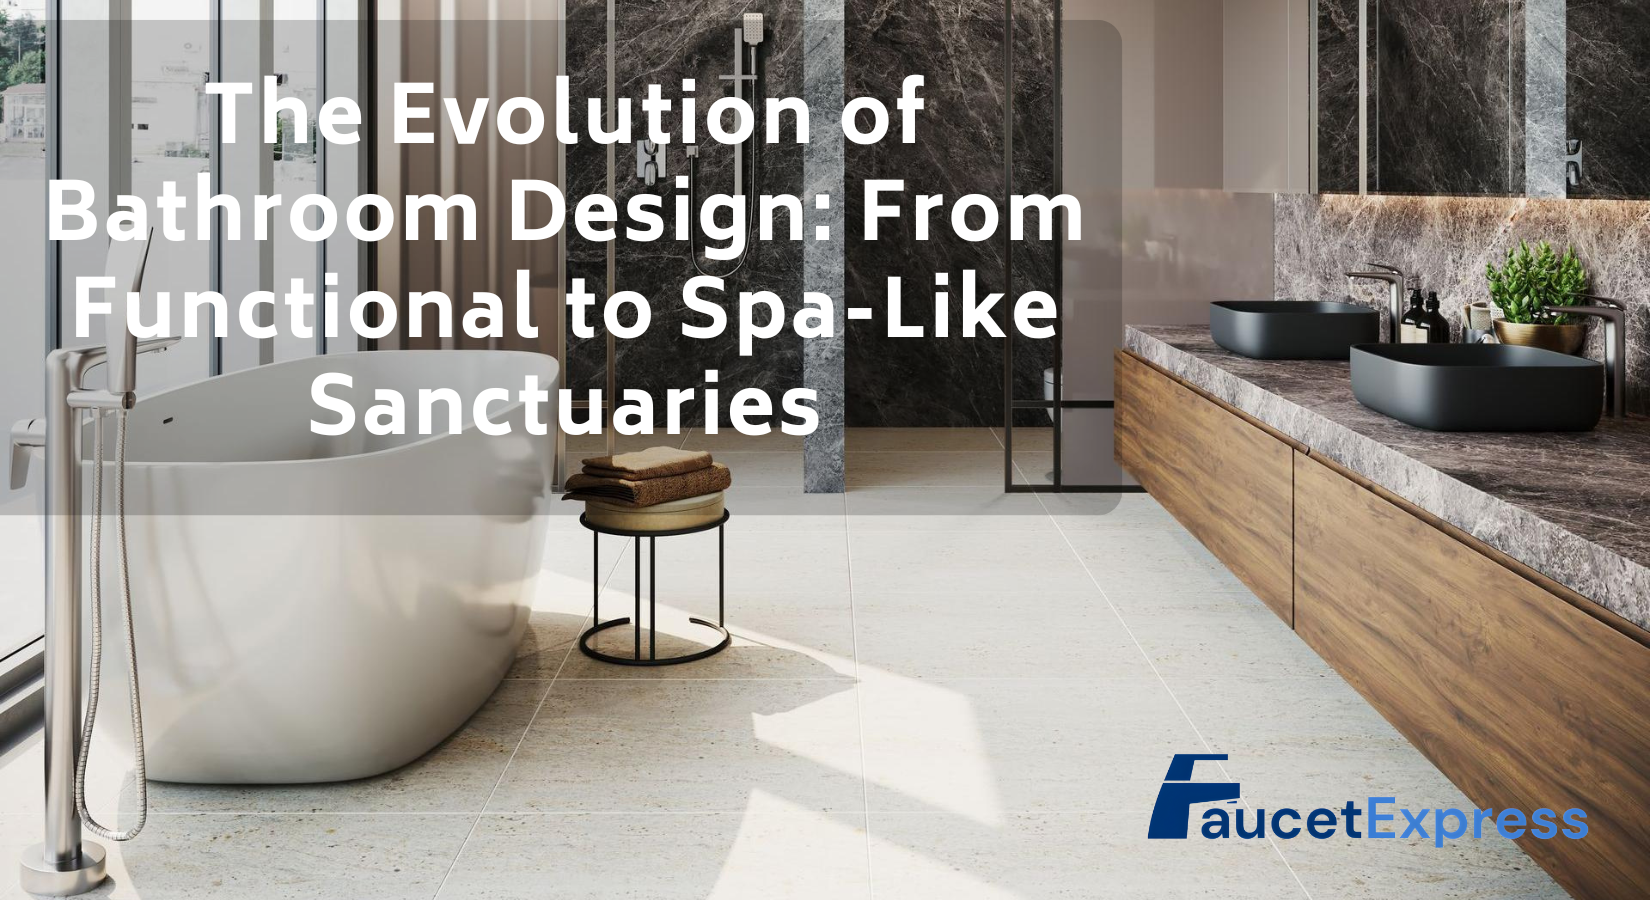 The Evolution of Bathroom Design: From Functional to Spa-Like Sanctuaries